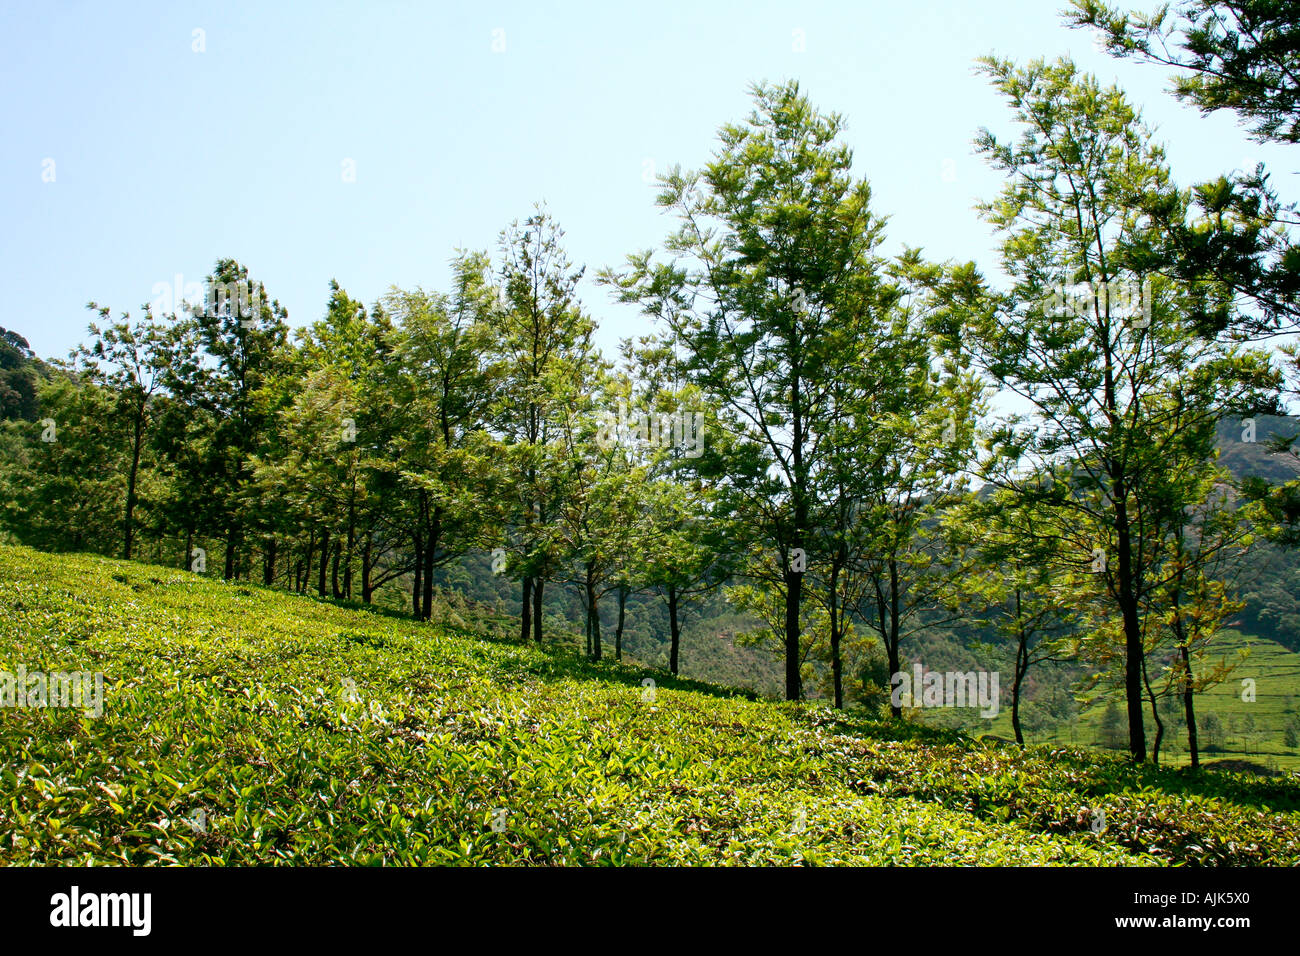 A green hill planted with a line of trees amidst tea plantations at Munnar, Kerala, India Stock Photo